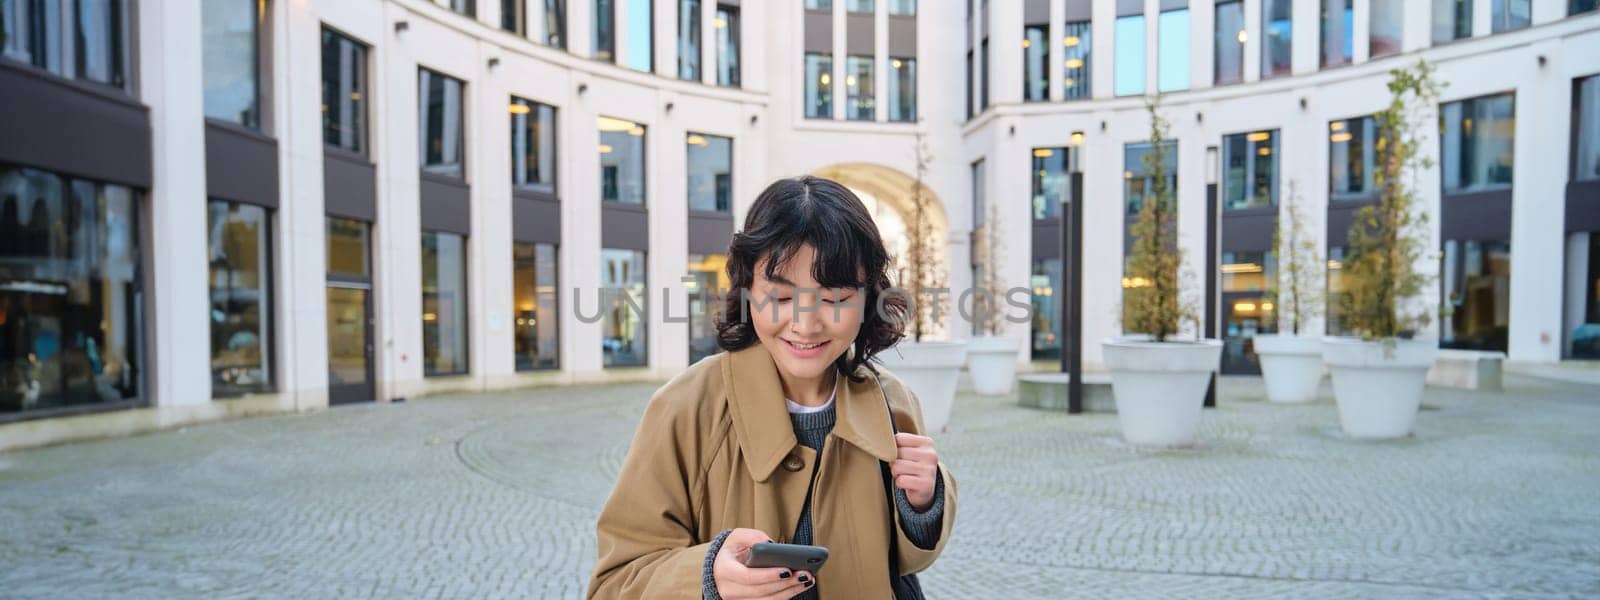 Technology, application and cellular concept. Smiling asia woman uses mobile phone, holds smartphone and reads text message, walks on streets of city centre.